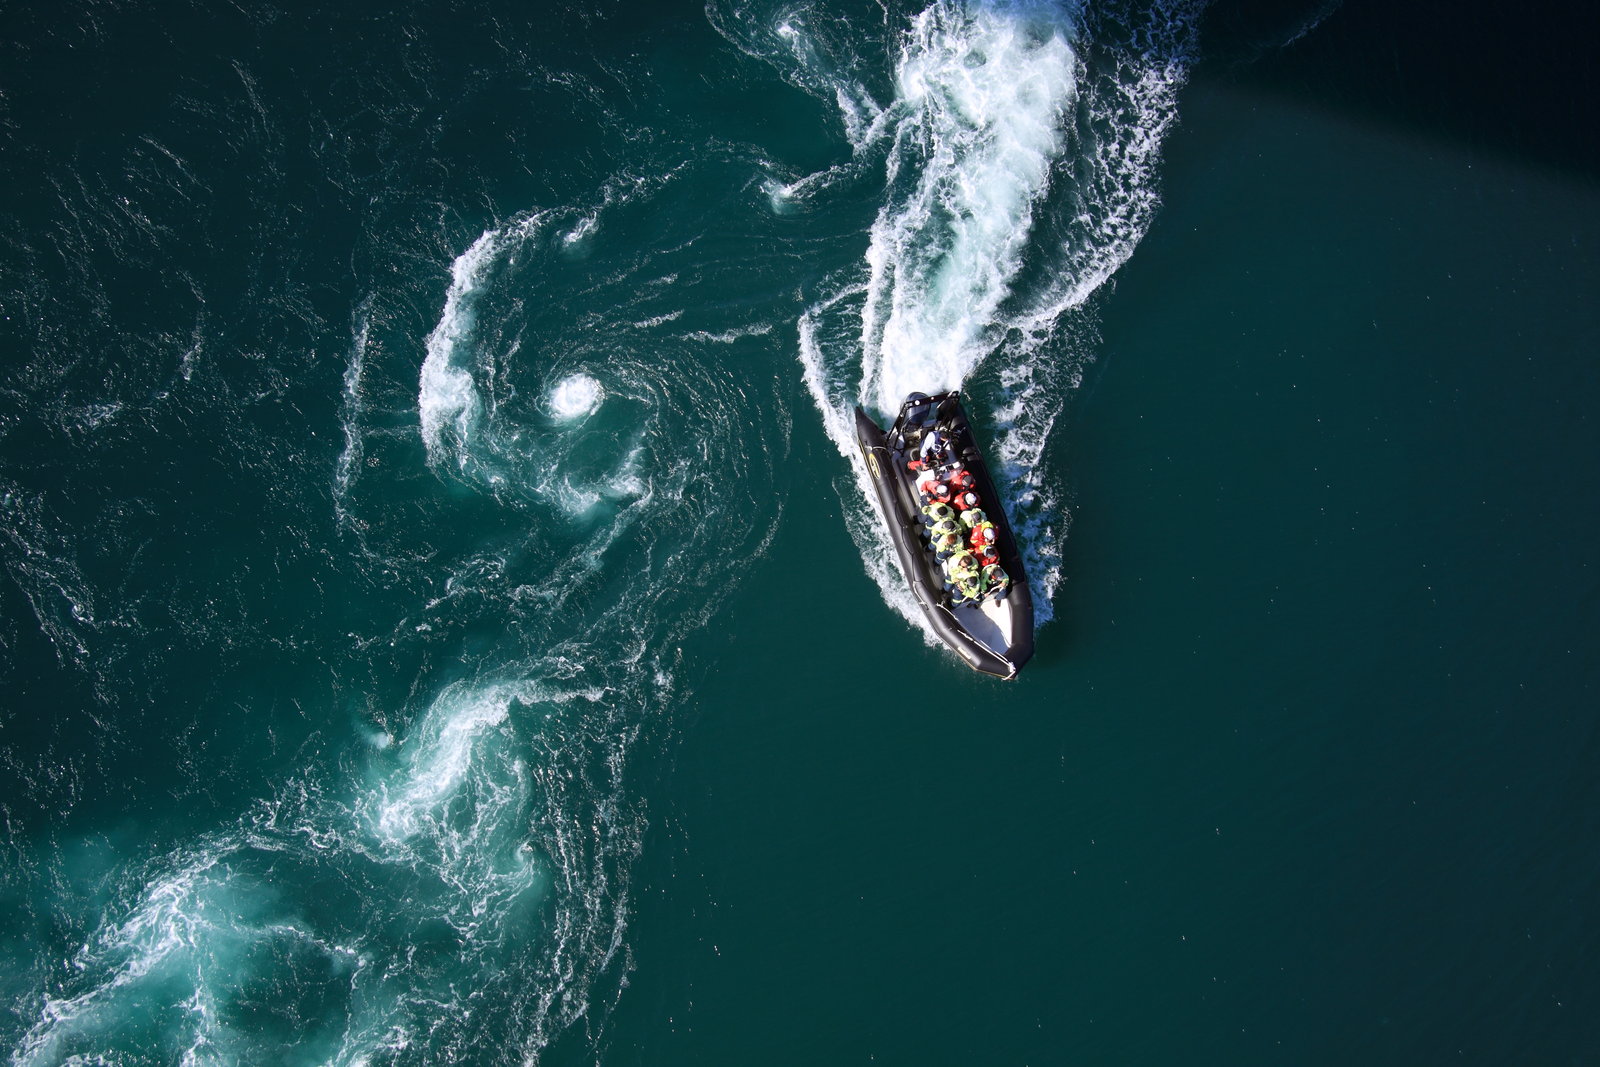 Current forecasts benefit seafarers seeking to pass through the Saltstraumen strait. Photo: Tommy Andreassen, www.nordnorge.com (Bodø).